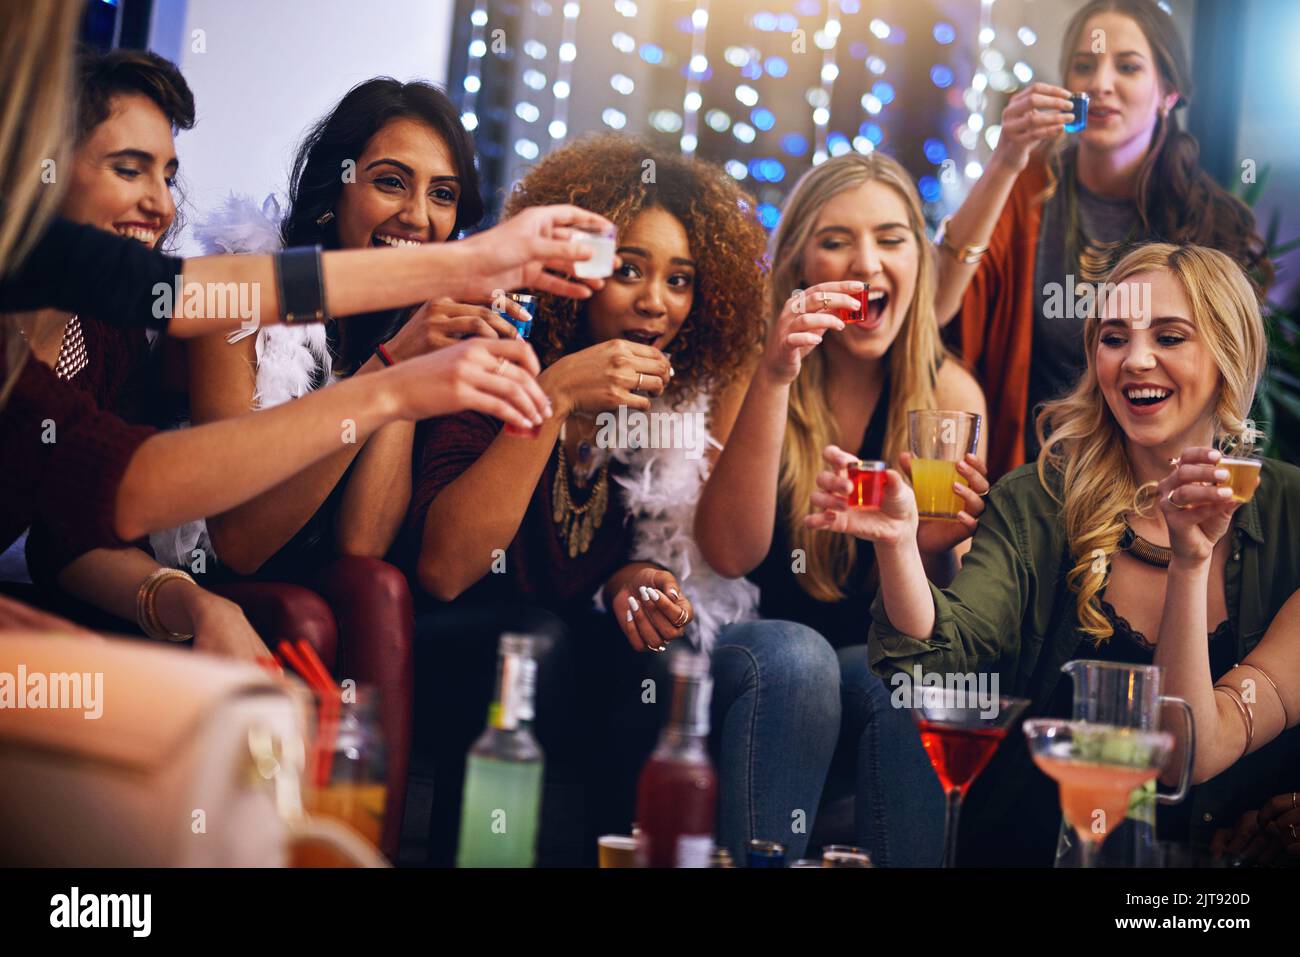 Three, two, one - down. a group of friends having shots together at a party. Stock Photo